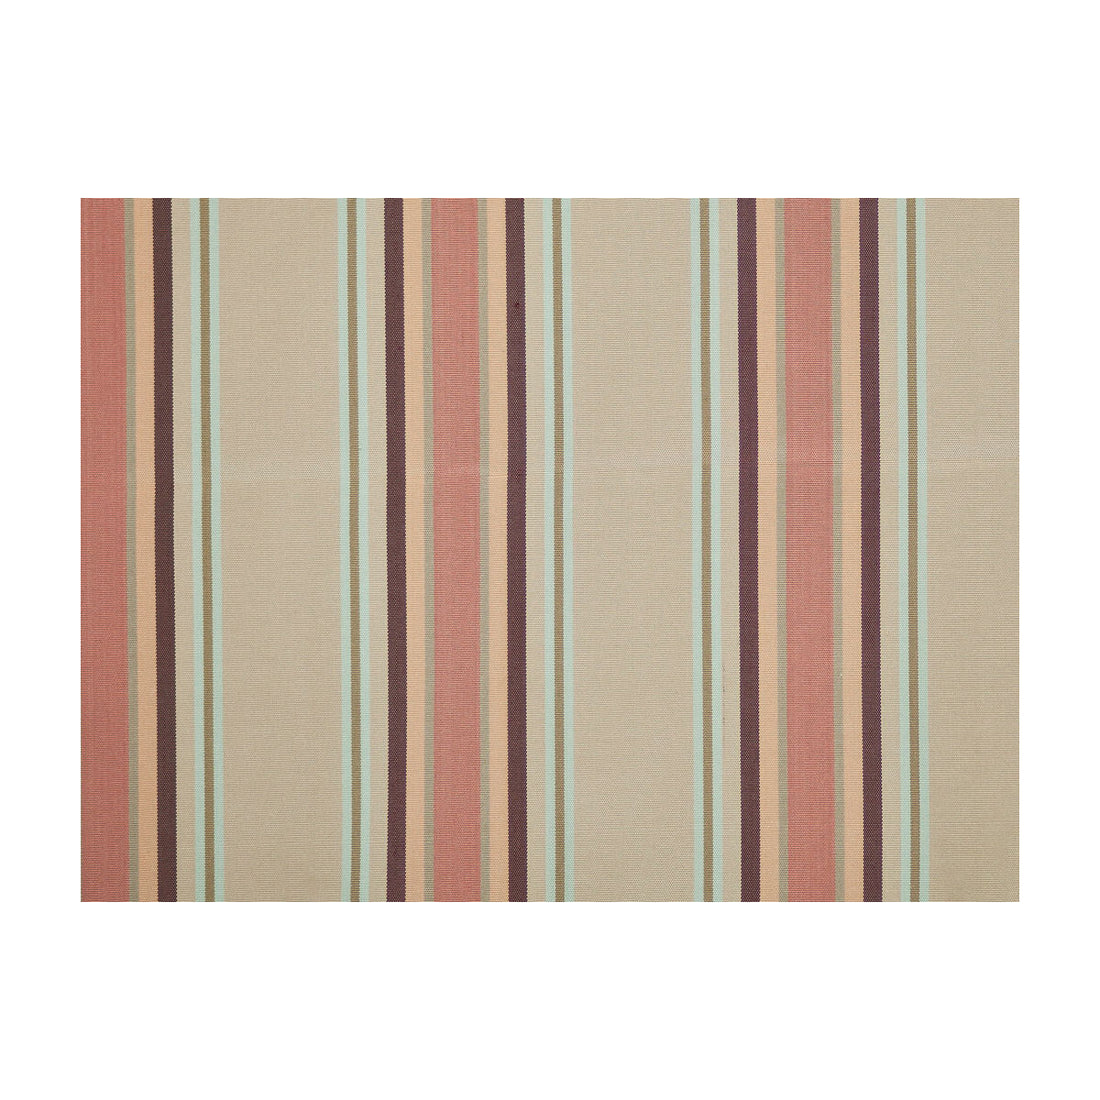 General Stripe fabric in aurora color - pattern JAG-50030.7163.0 - by Brunschwig &amp; Fils in the Jagtar collection